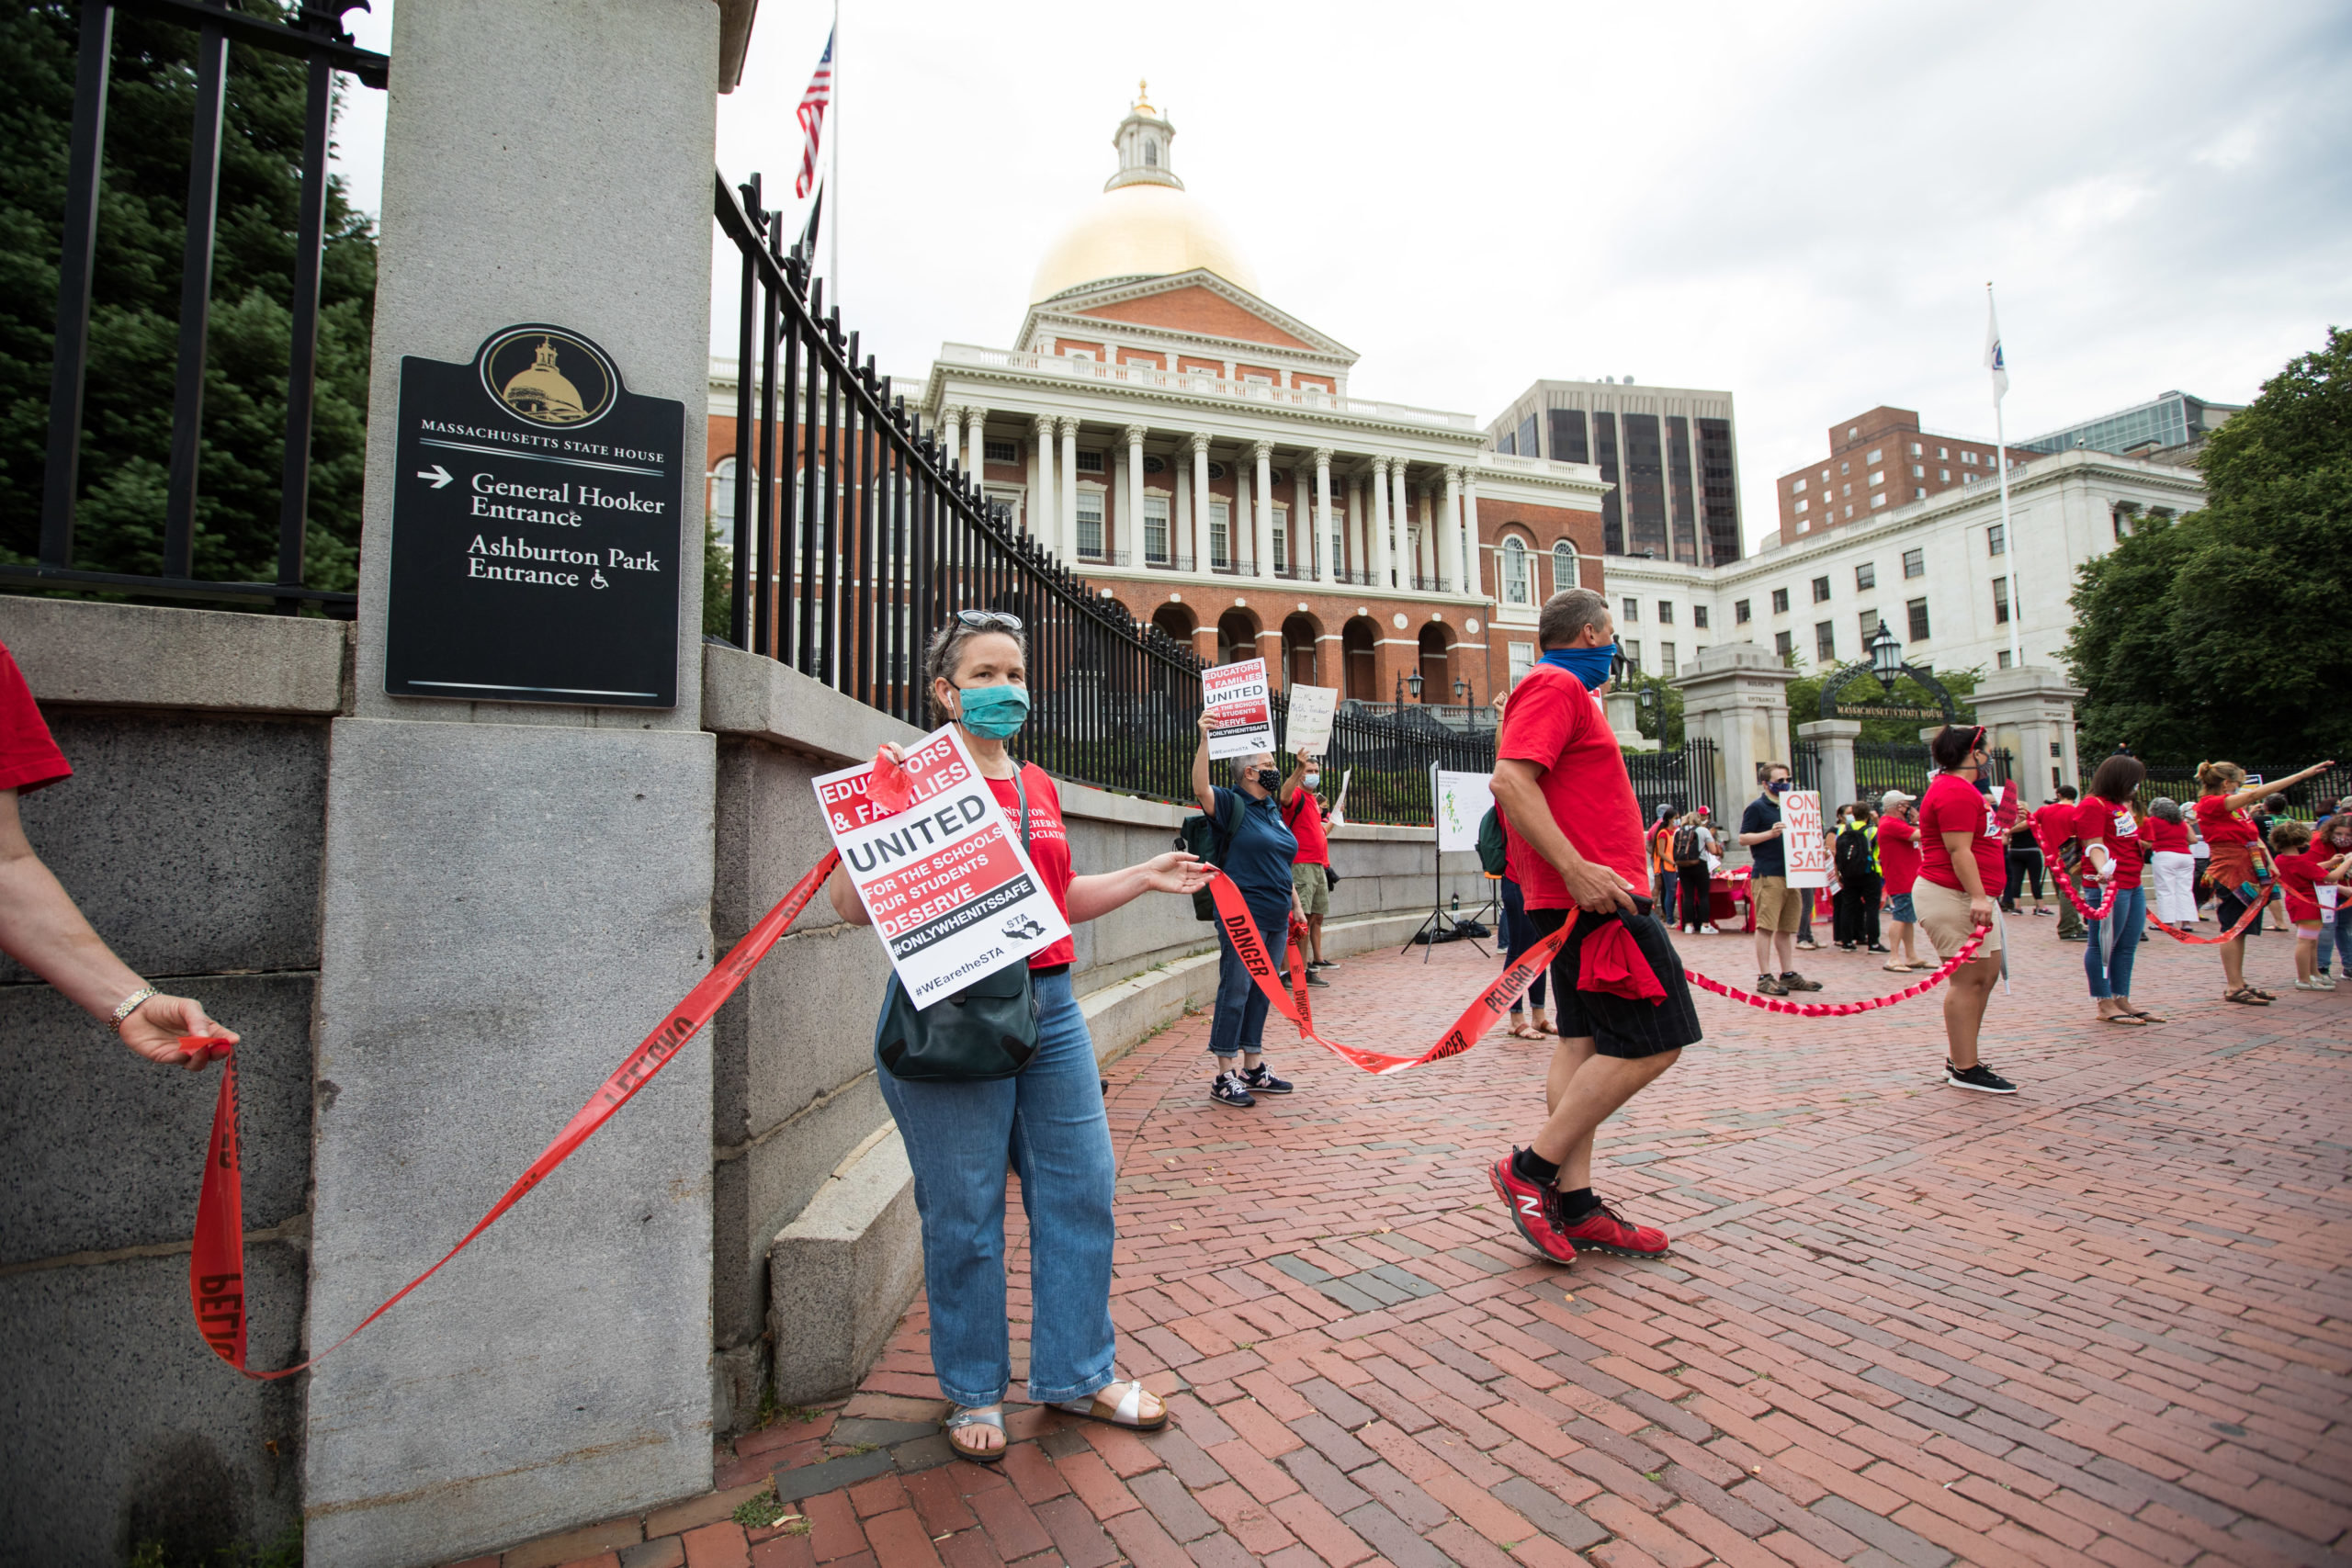 People participating in a protest organized by the American Federation of Teachers form a human chain around the Massachusetts State House on August 19, 2020 in Boston, Massachusetts. The group is calling for a uniform requirement for all districts to start the school year with a comprehensive distance learning plan (Photo by Scott Eisen/Getty Images)